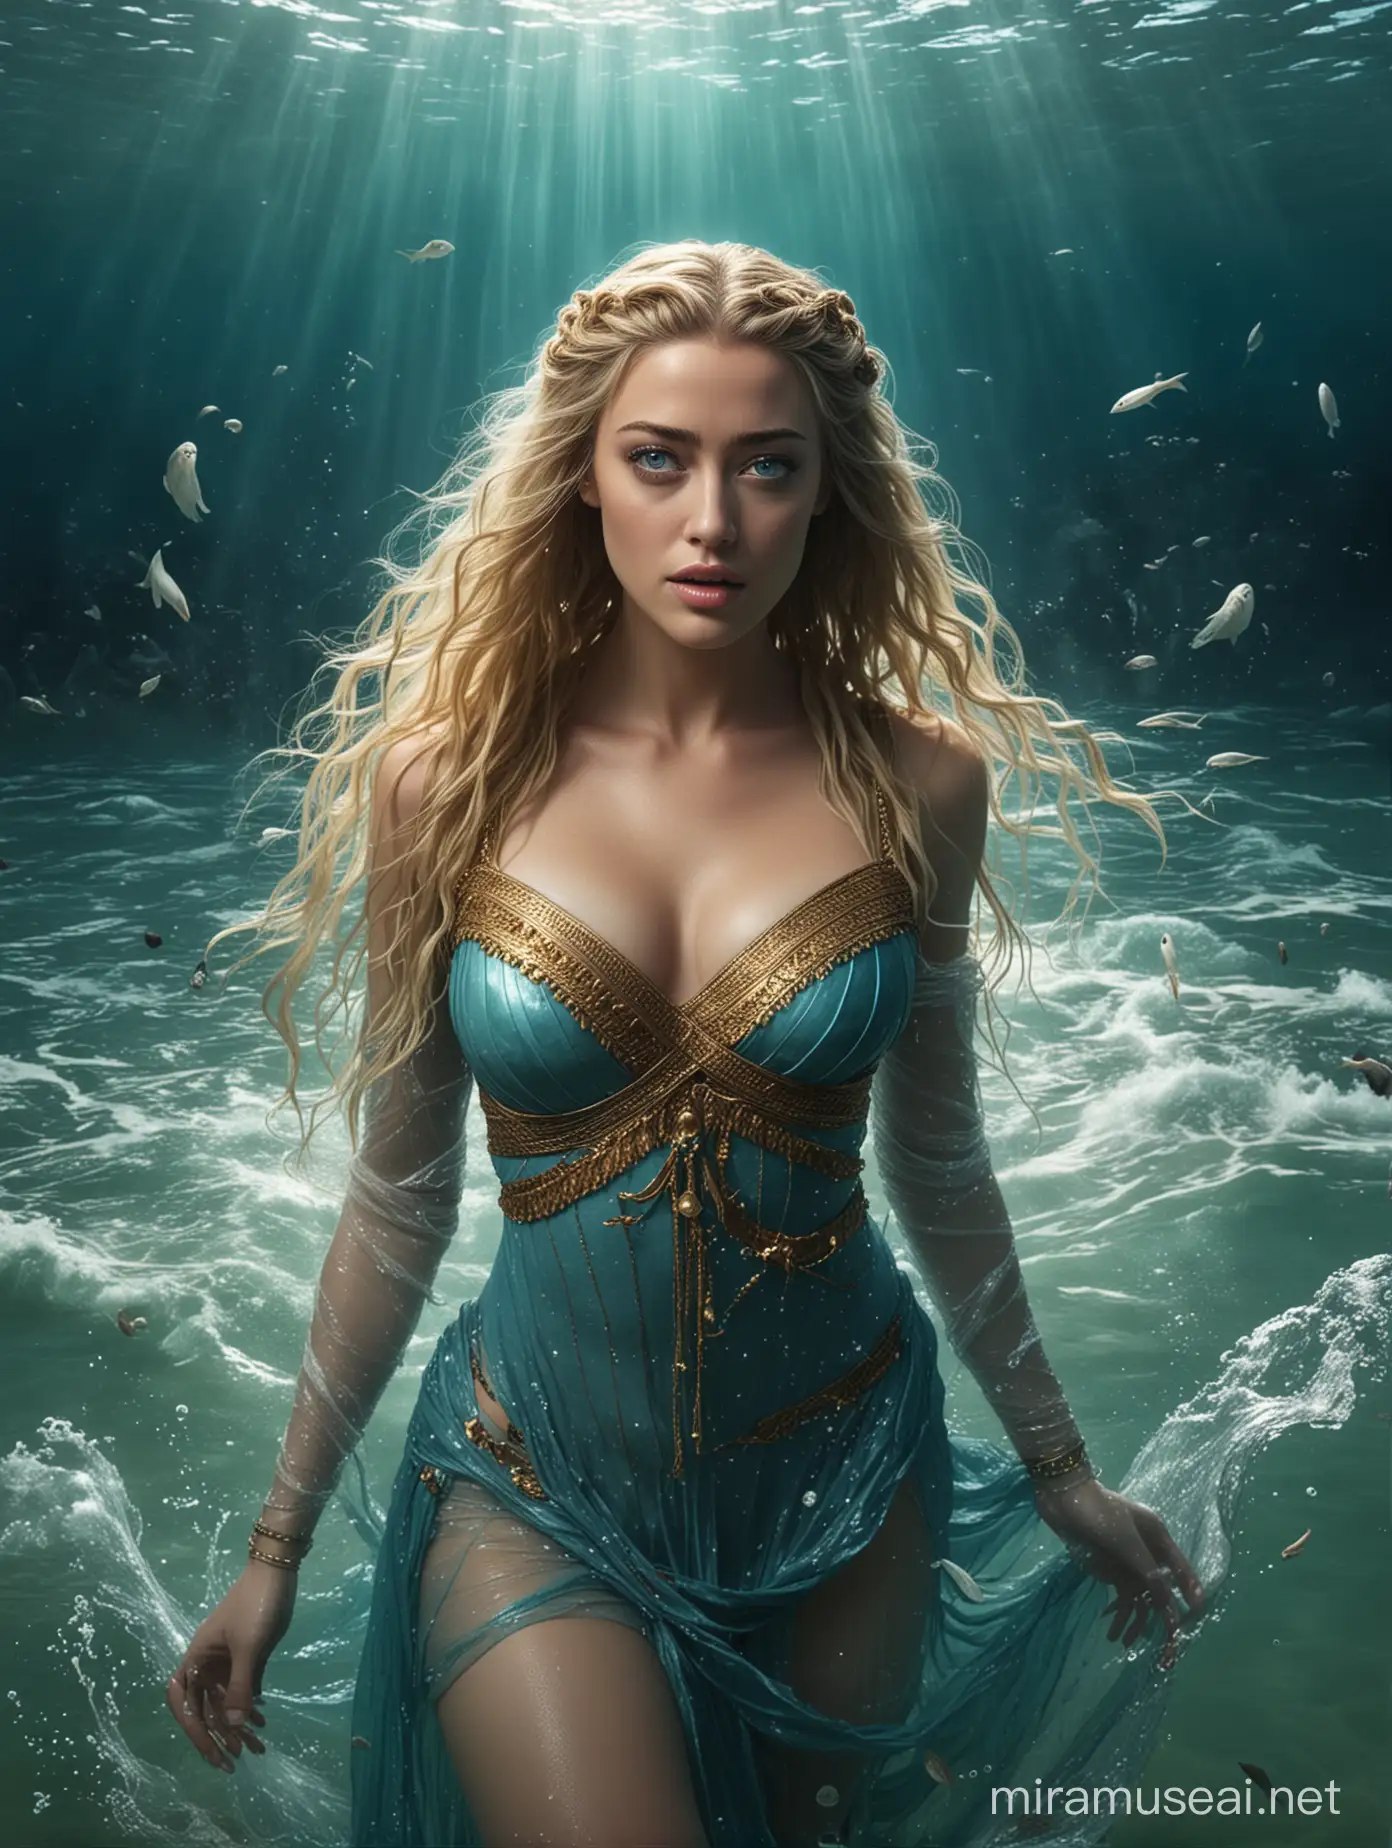 A masterpieced of Amber Heard as Isis, Egyptian goddess of the sea. She is under the sea, and her Greek dress flows ethereally in the water until it mixes with the water until it disappears. She has has blue eyes and blonde hair. 